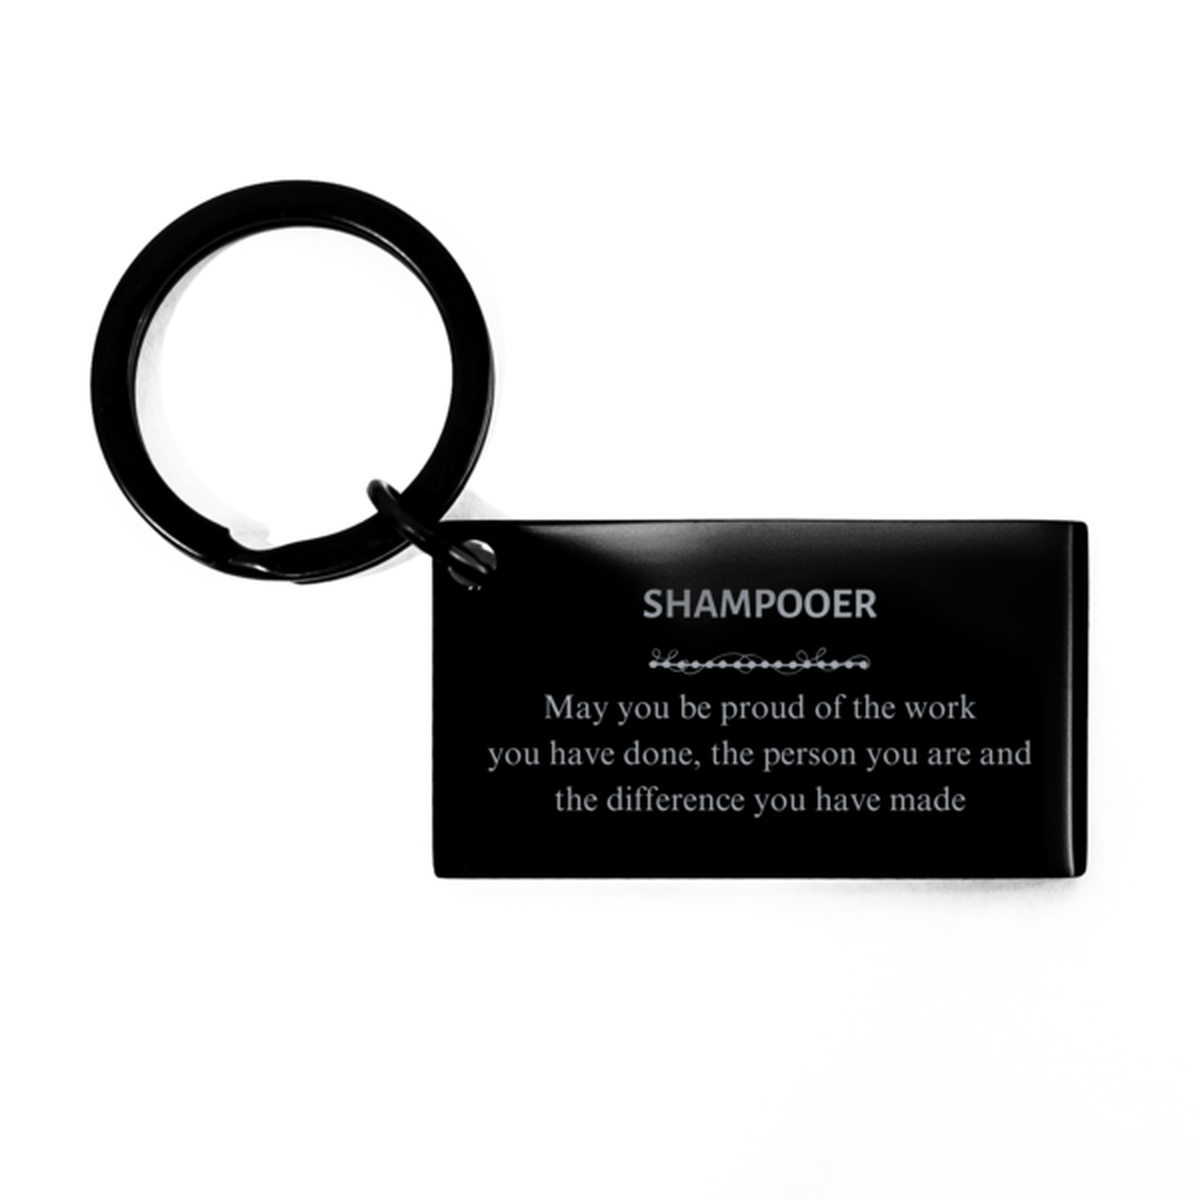 Veterinary Assistant May you be proud of the work you have done, Retirement Shampooer Keychain for Colleague Appreciation Gifts Amazing for Shampooer